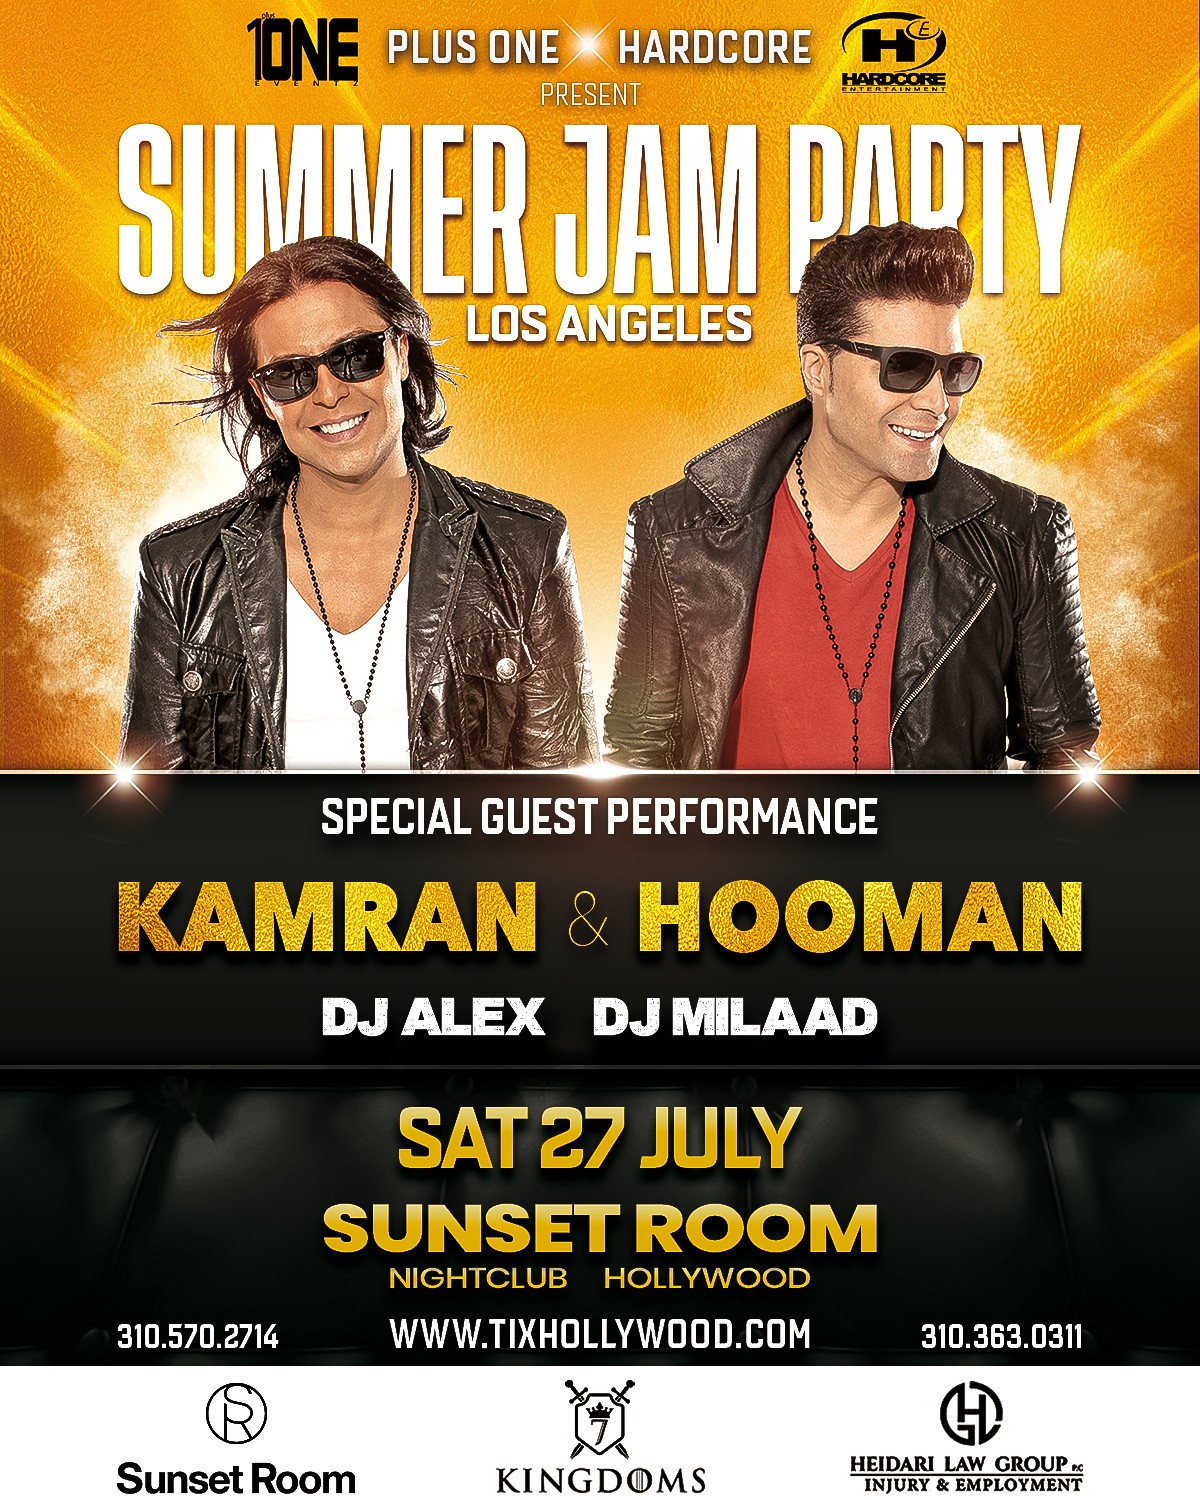 Summer Jam Party feat: KAMRAN & HOOMAN (Special Guest Performance) Saturday, July 27th @ Sunset Room Hollywood on Jul 27, 22:00@Sunset Room - Buy tickets and Get information on HARDCORE & PLUS ONE tixhollywood.com